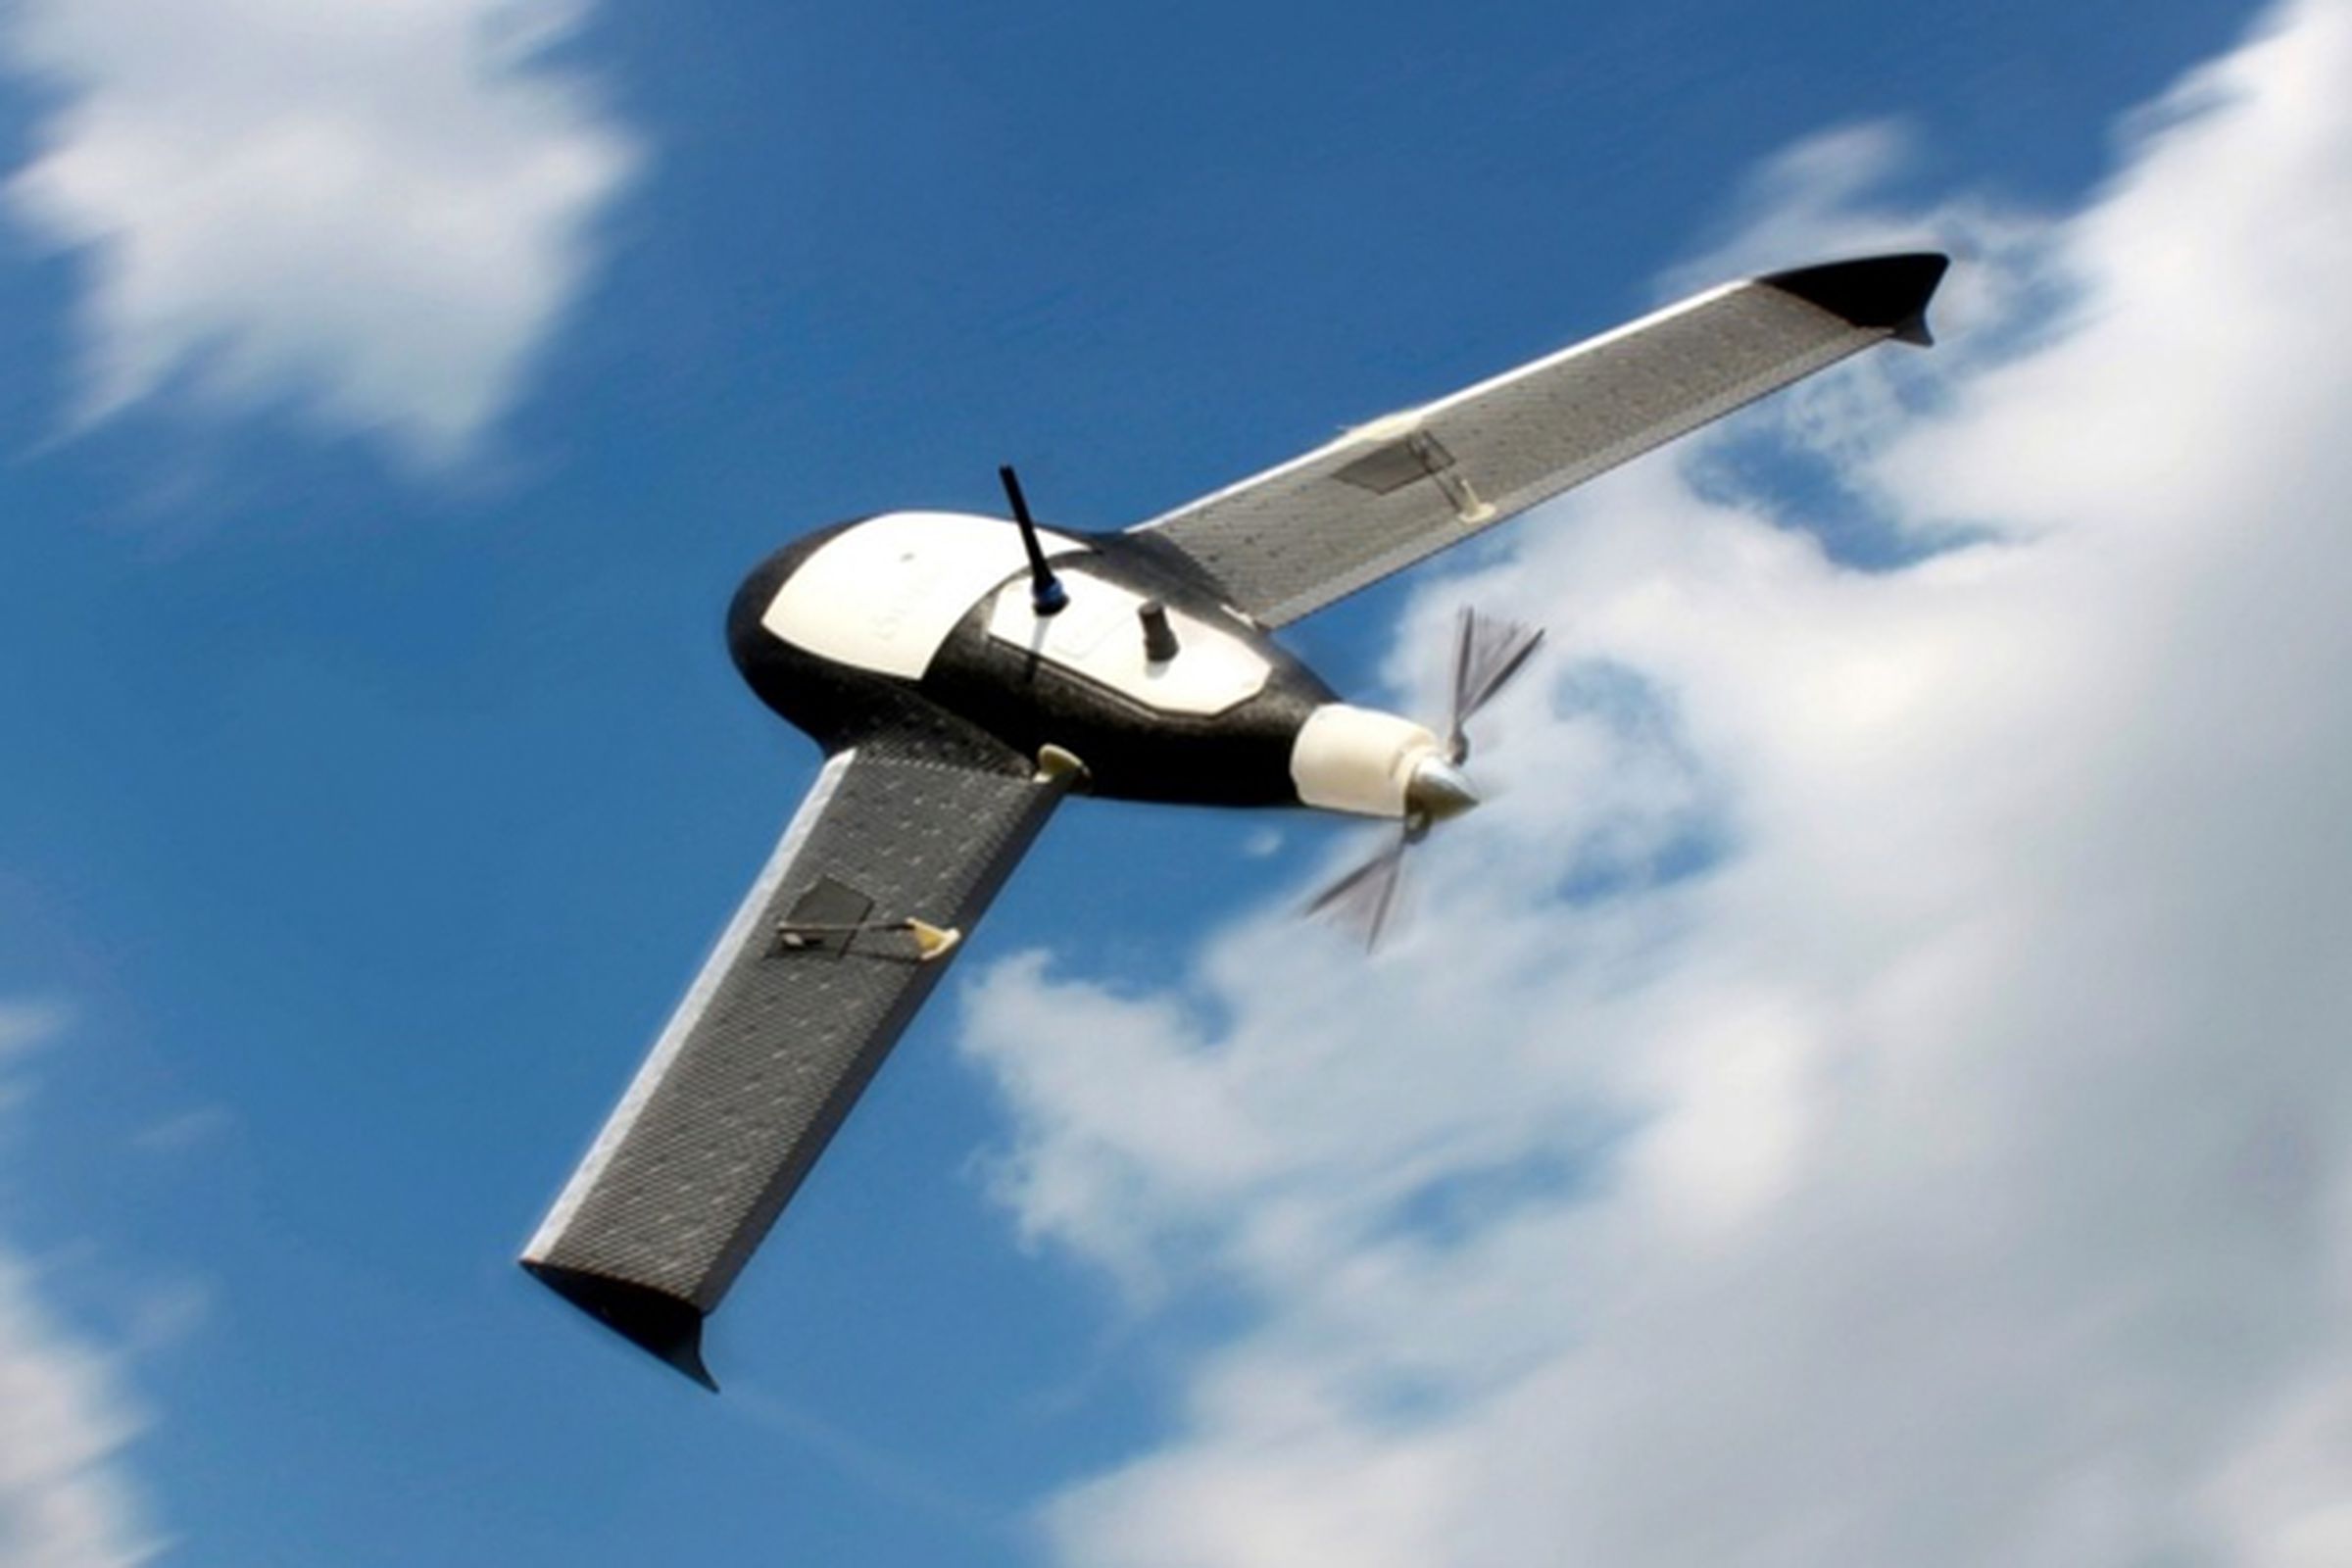 Gatewing X100 Aerial Drone